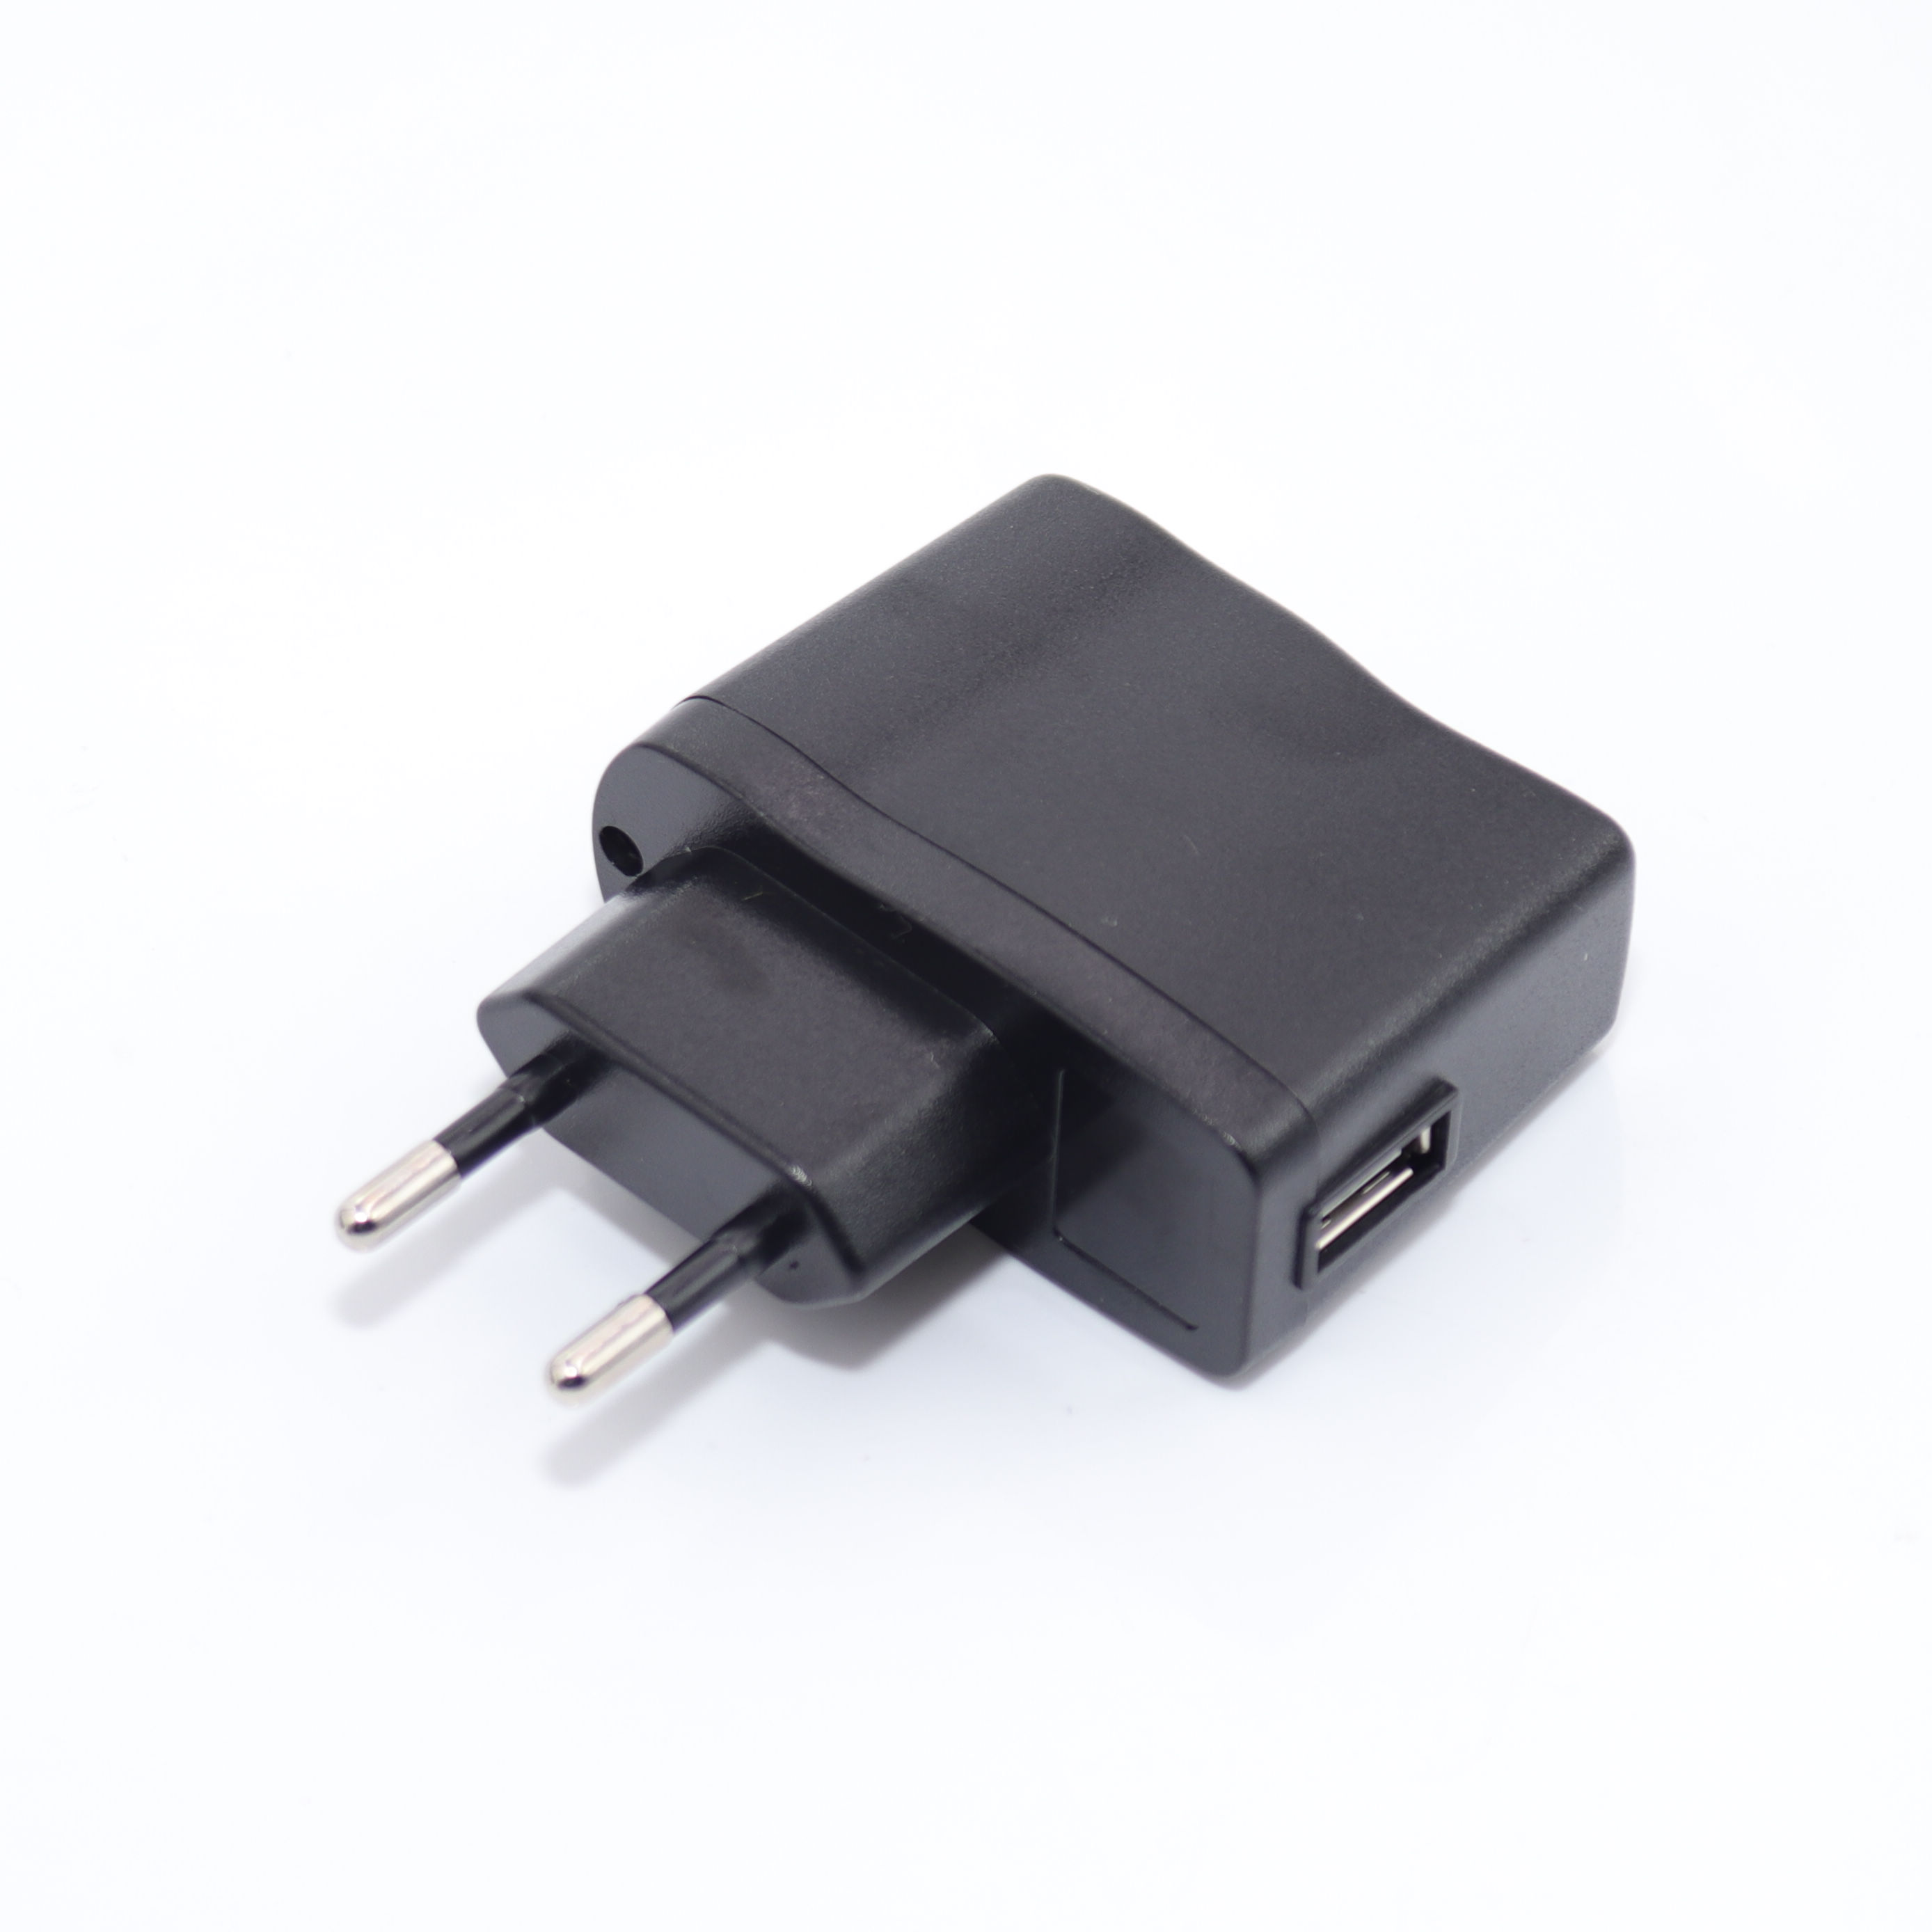 ADAPTER CHARGER  FOR SMART PHONE 5V-1A-  راسيه شحن بدون كبل ,Smartphones & Tab Chargers